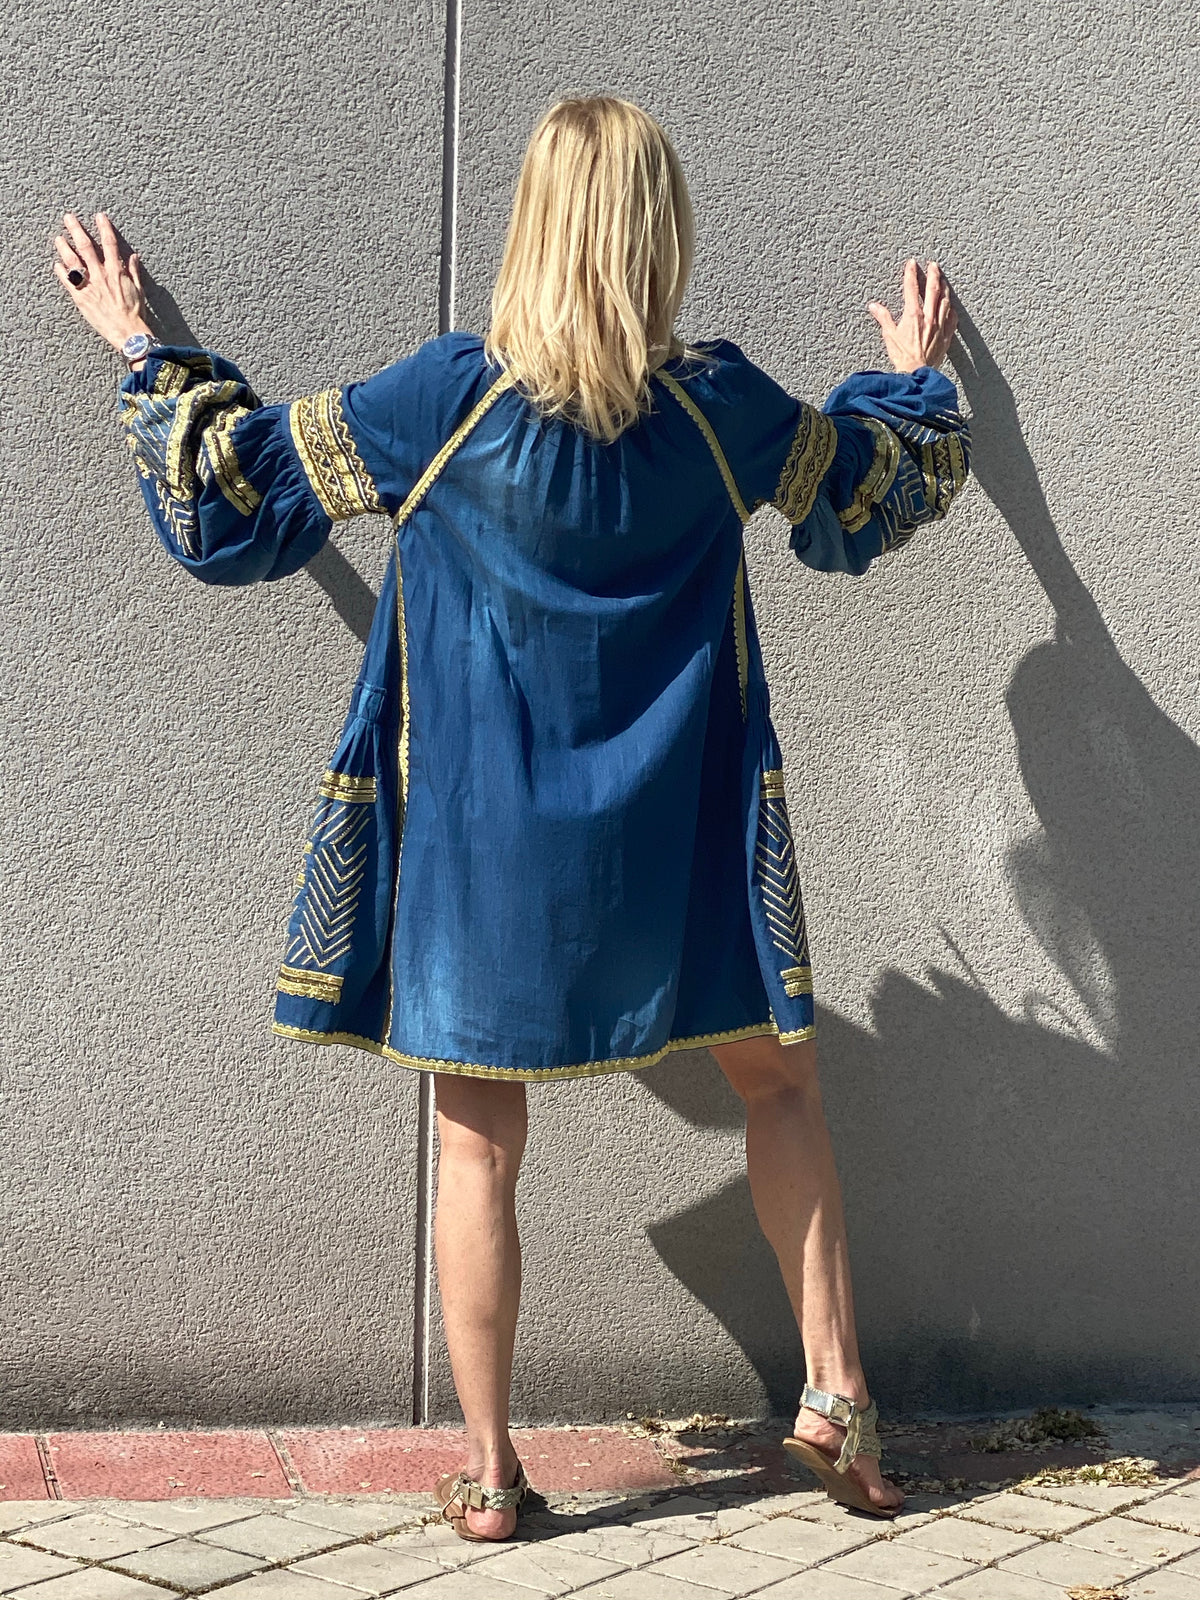 LIMITED EDITION EMBROIDERED DENIM DRESS embroidery